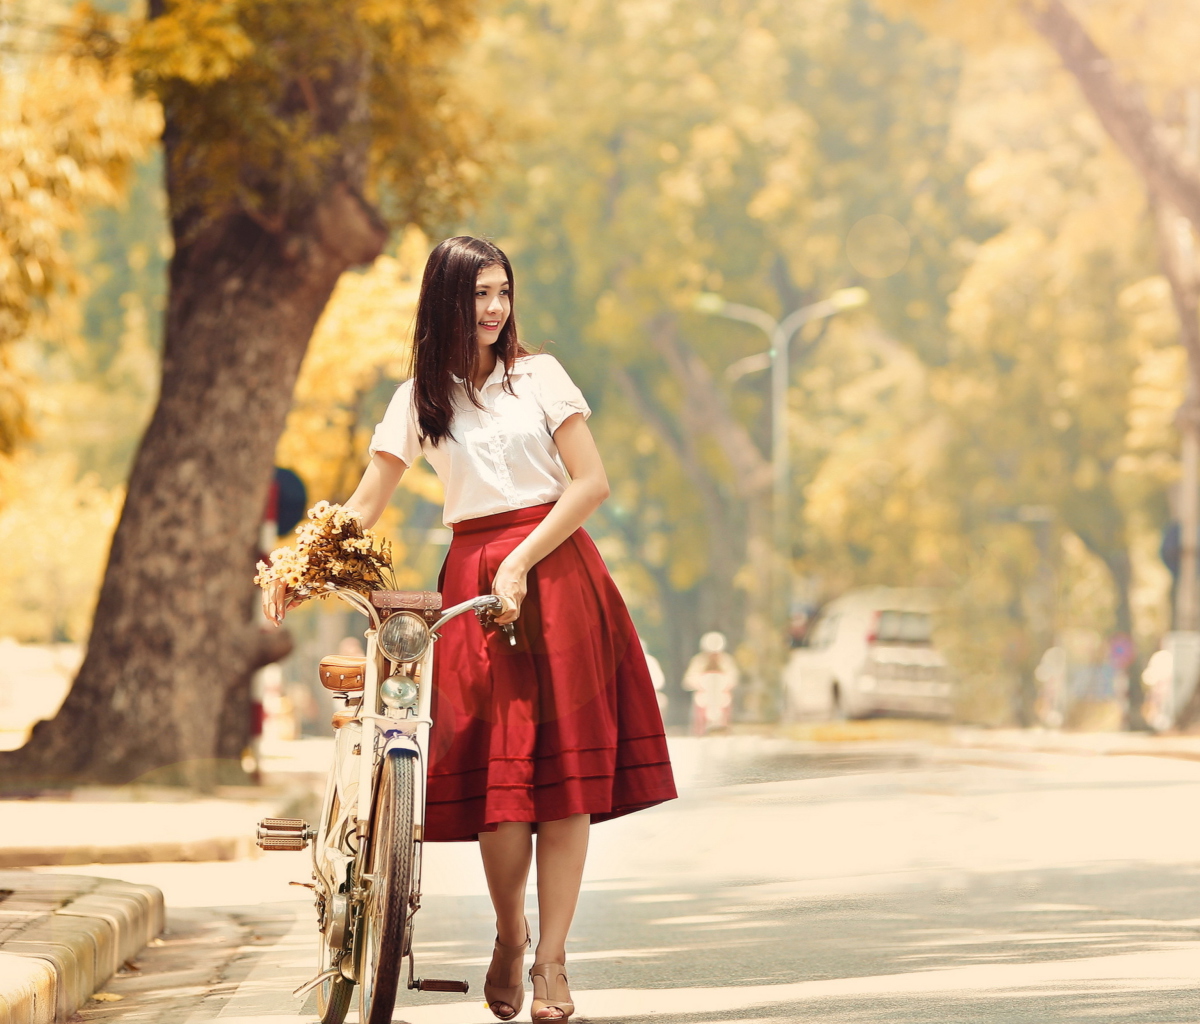 Romantic Girl With Bicycle And Flowers wallpaper 1200x1024